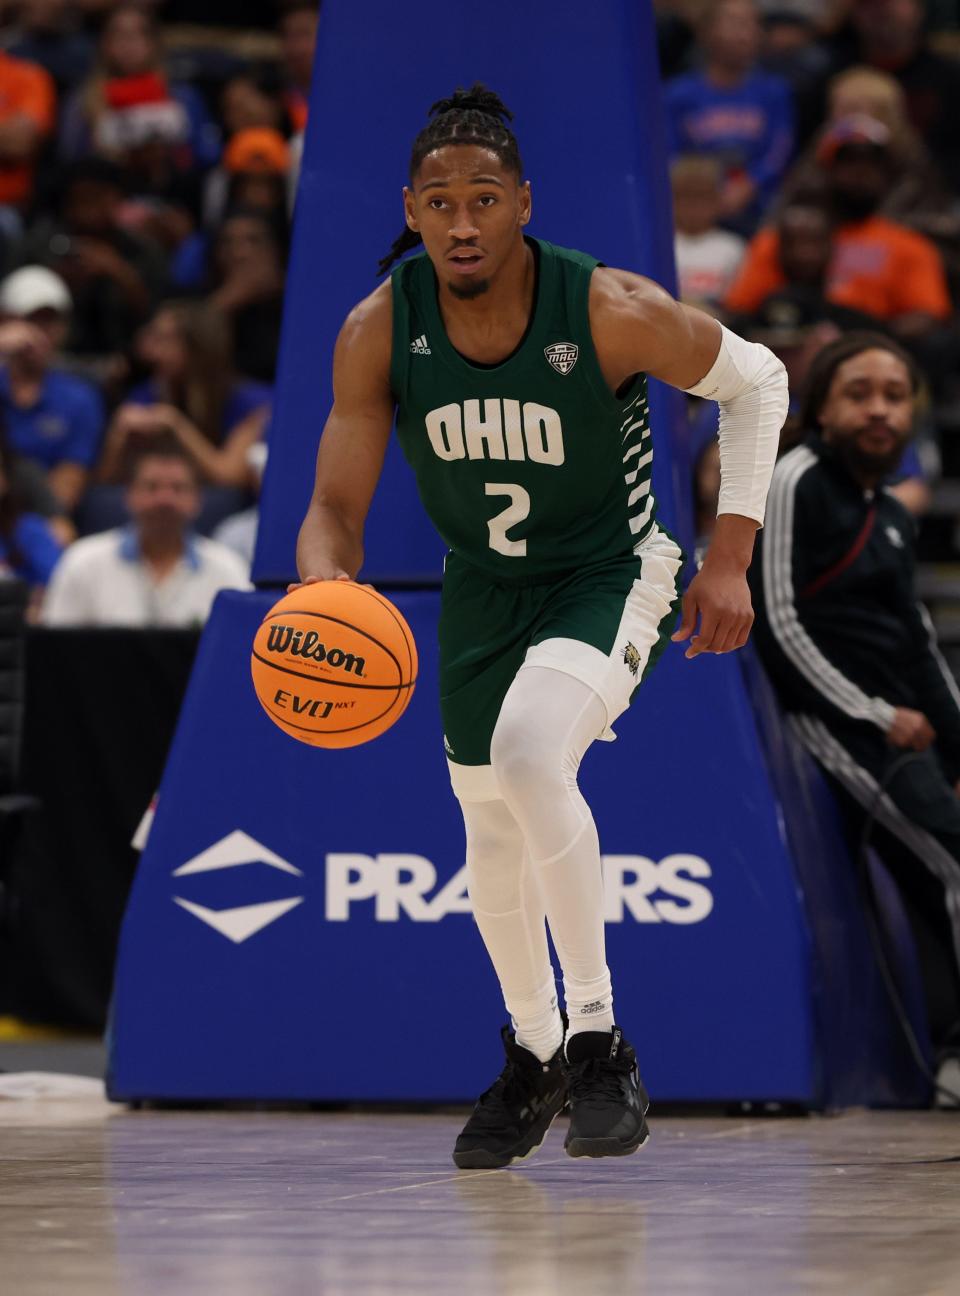 Miles Brown is back for the Ohio Bobcats after leading the team in 3-point shooting last season.